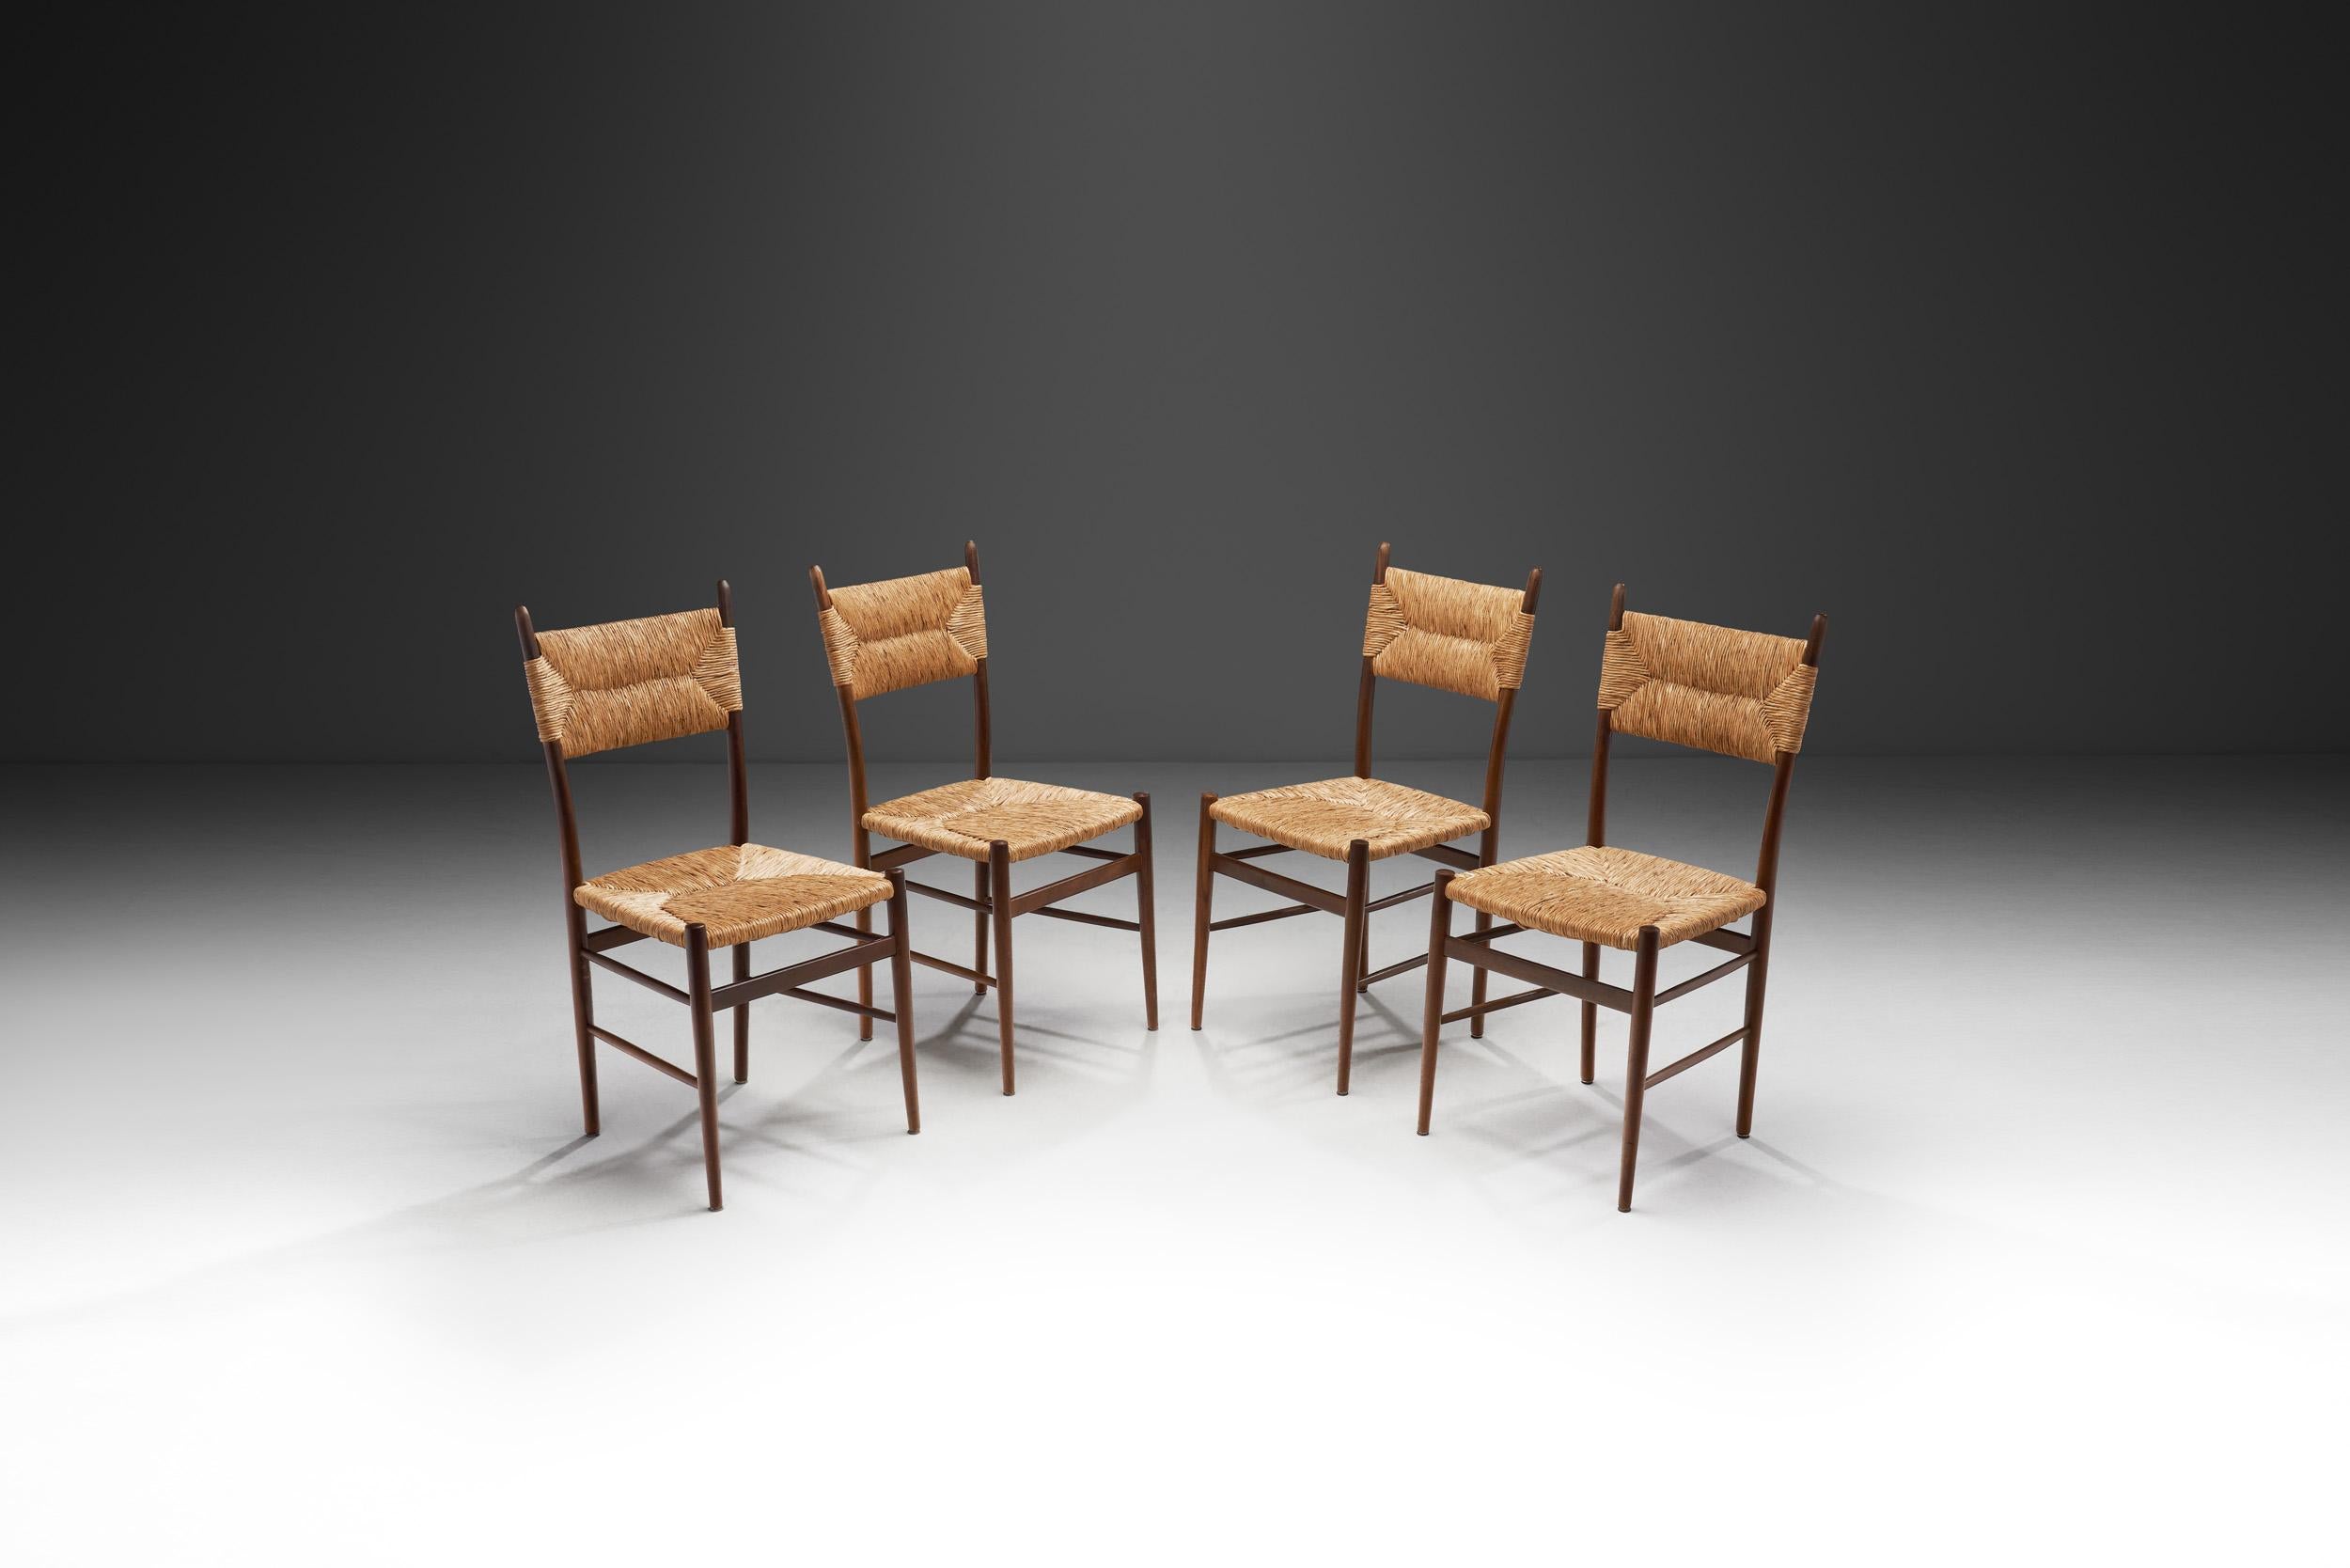 Mid-Century Modern A Set of Four Dining Chairs with Woven Straw Seats and Backs, Europe ca 1950s